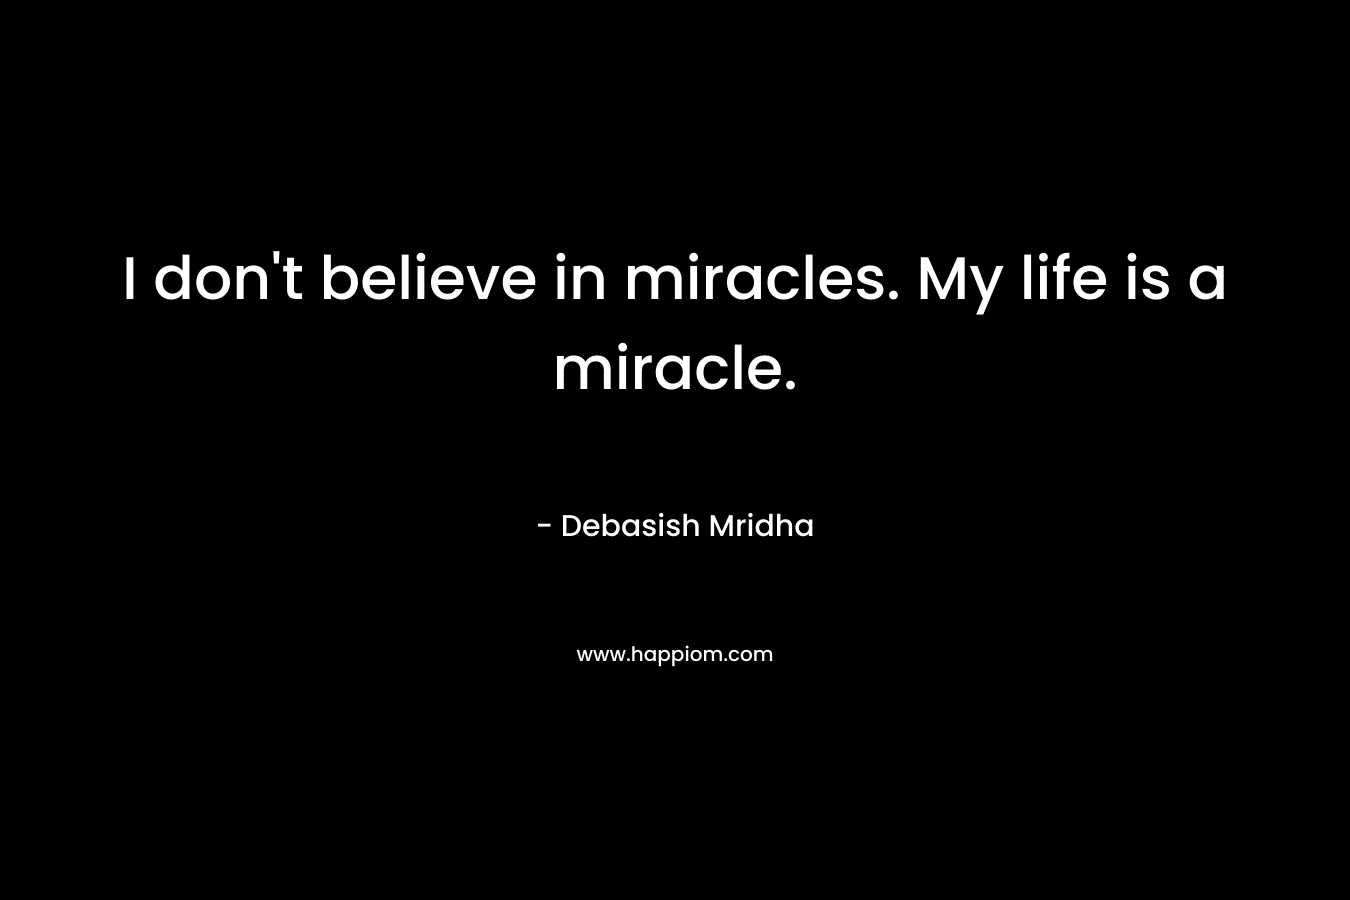 I don't believe in miracles. My life is a miracle.